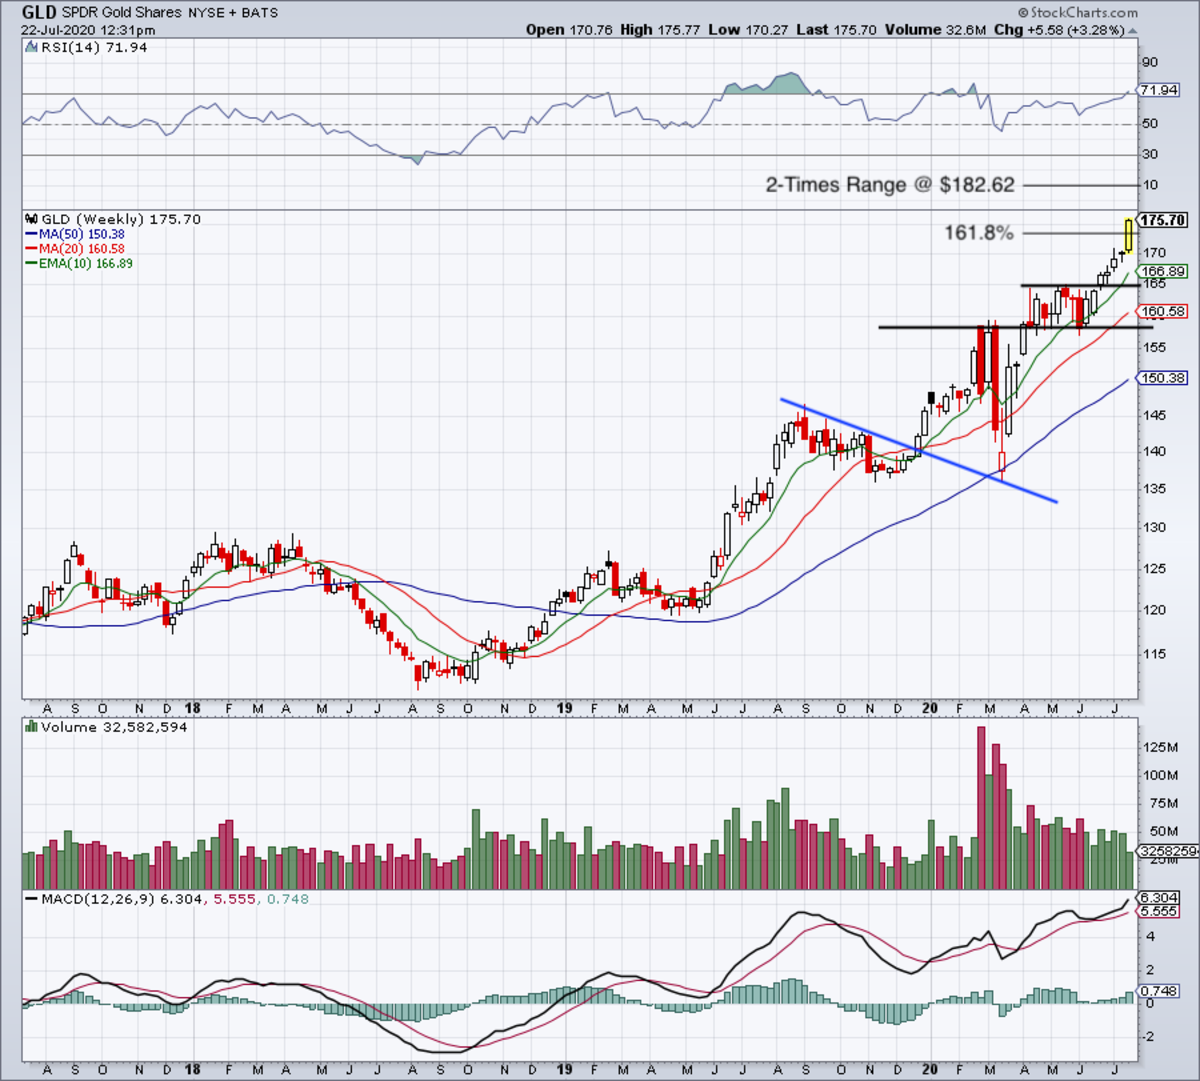 Weekly chart of the GLD ETF.